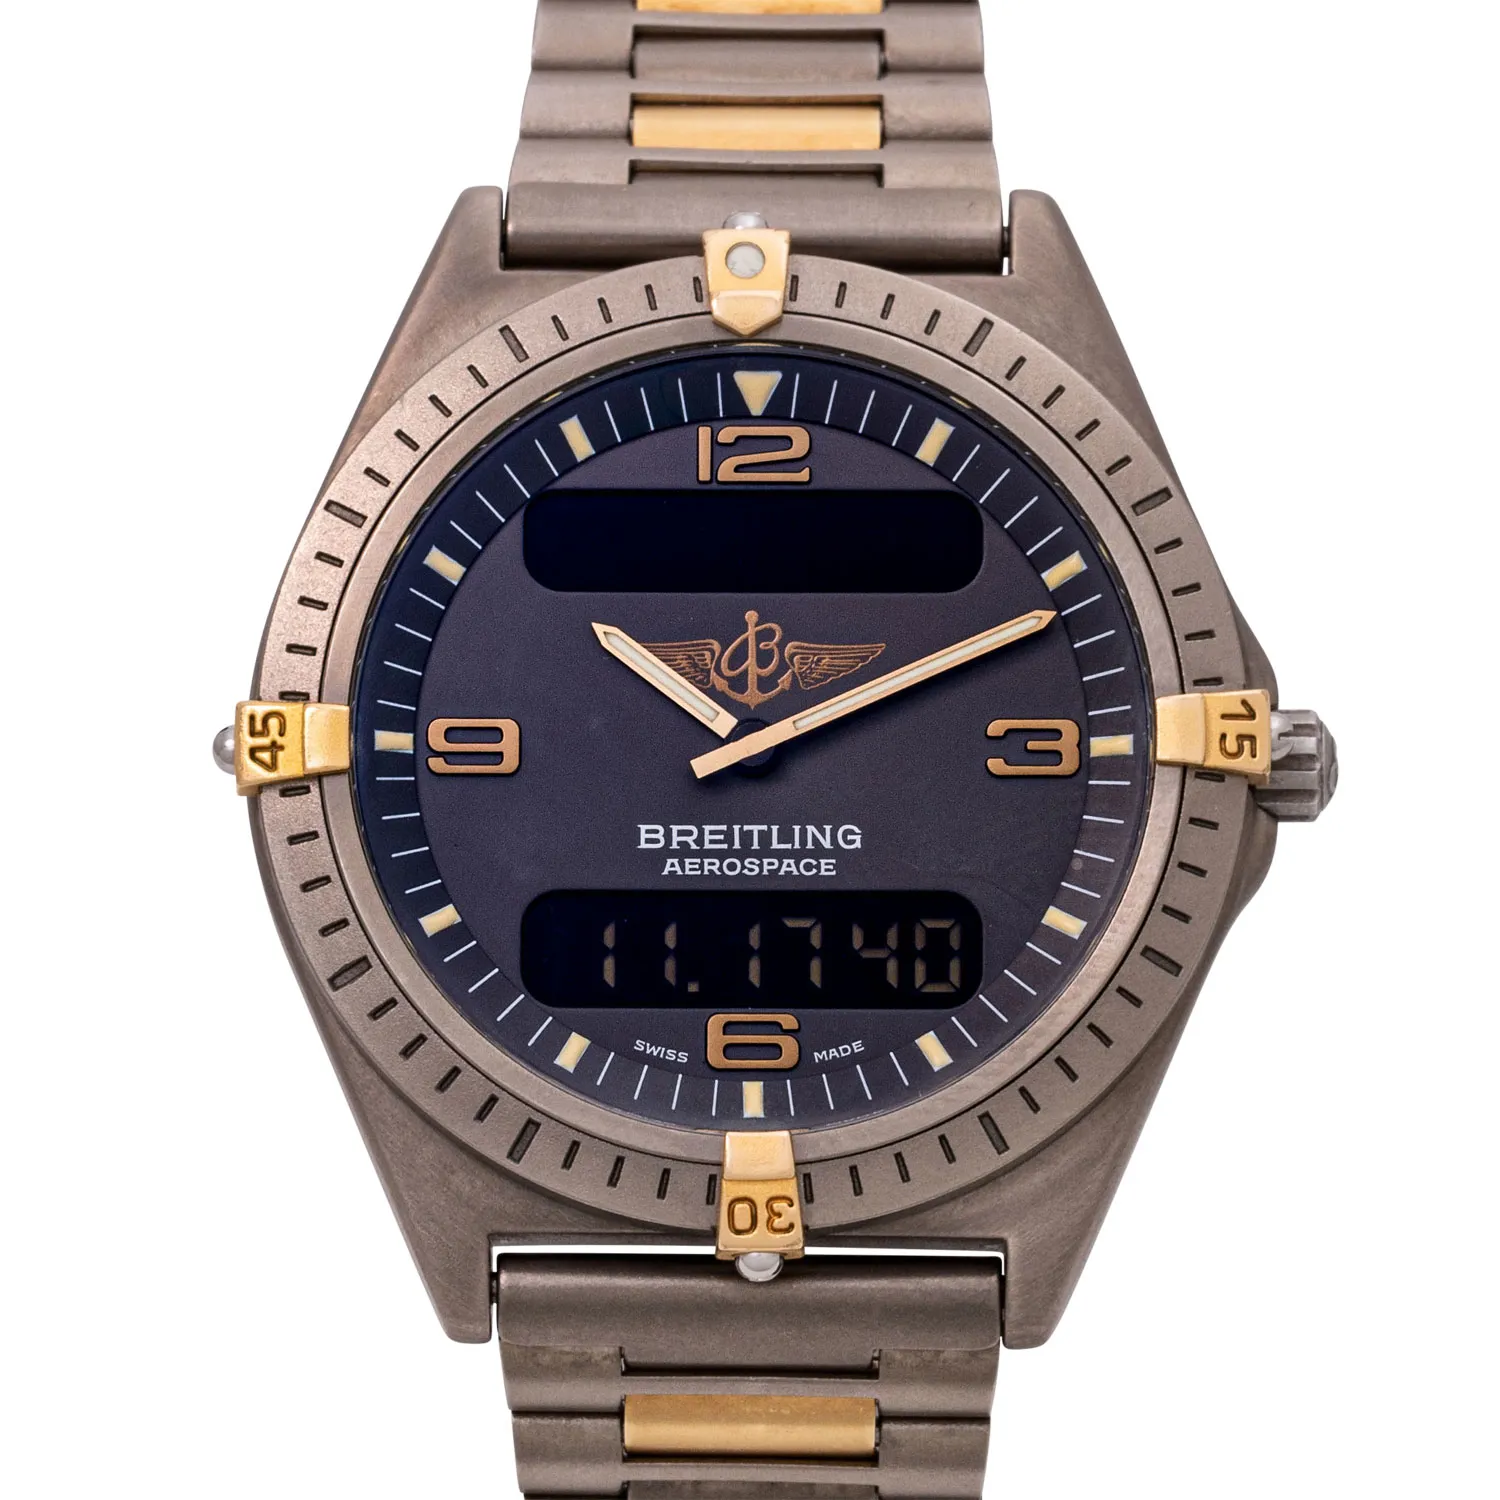 Breitling Aerospace F56061 40mm Titanium and gold-plated